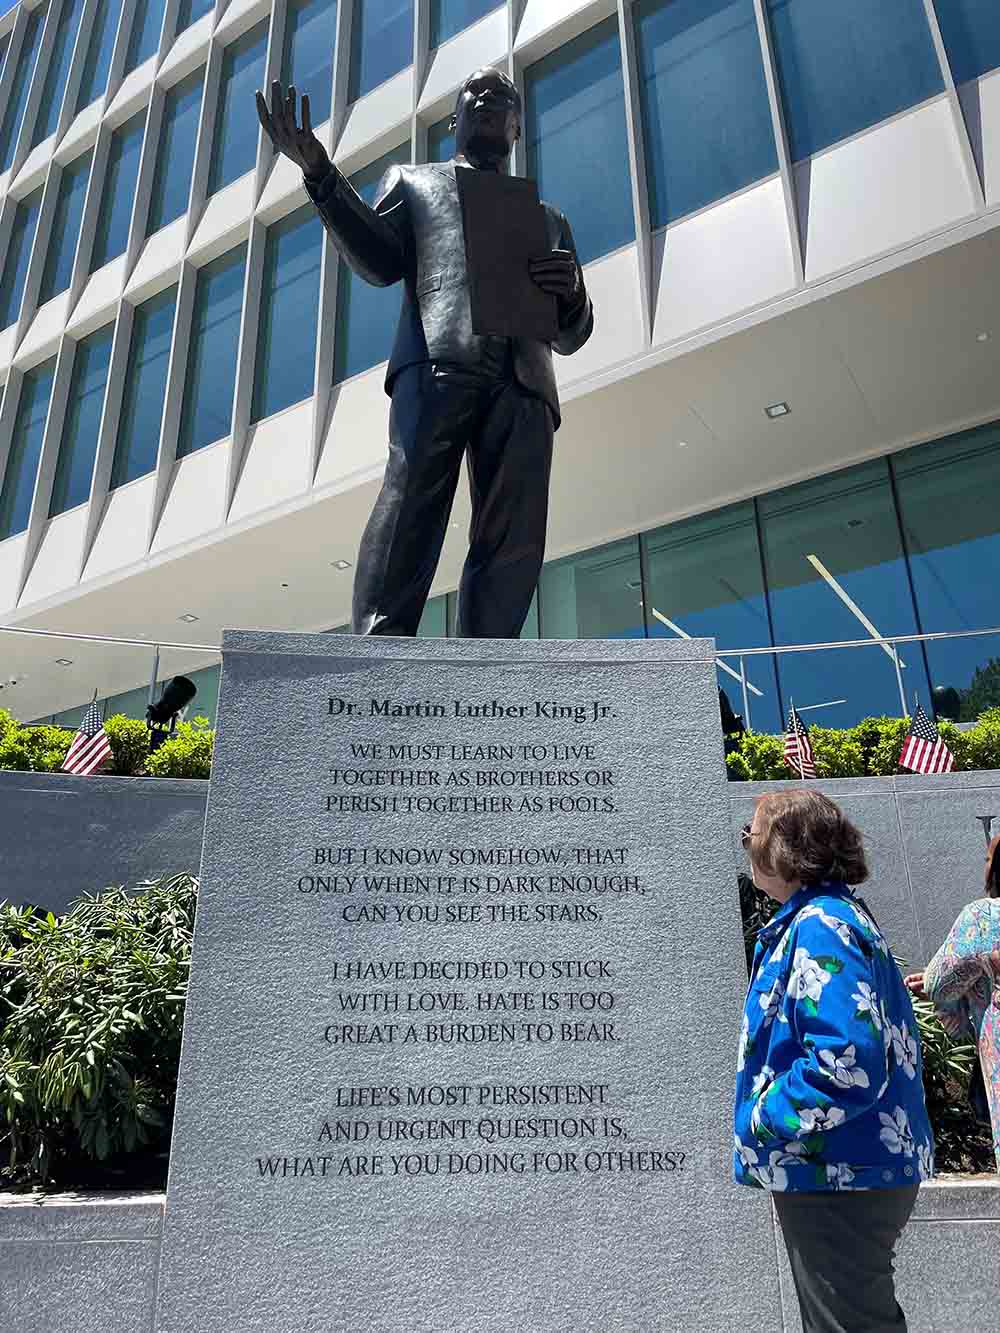 Martin Luther King, Jr. Commemorative Commission at Essex County’s dedication at their Martin Luther King, Jr. Justice Building